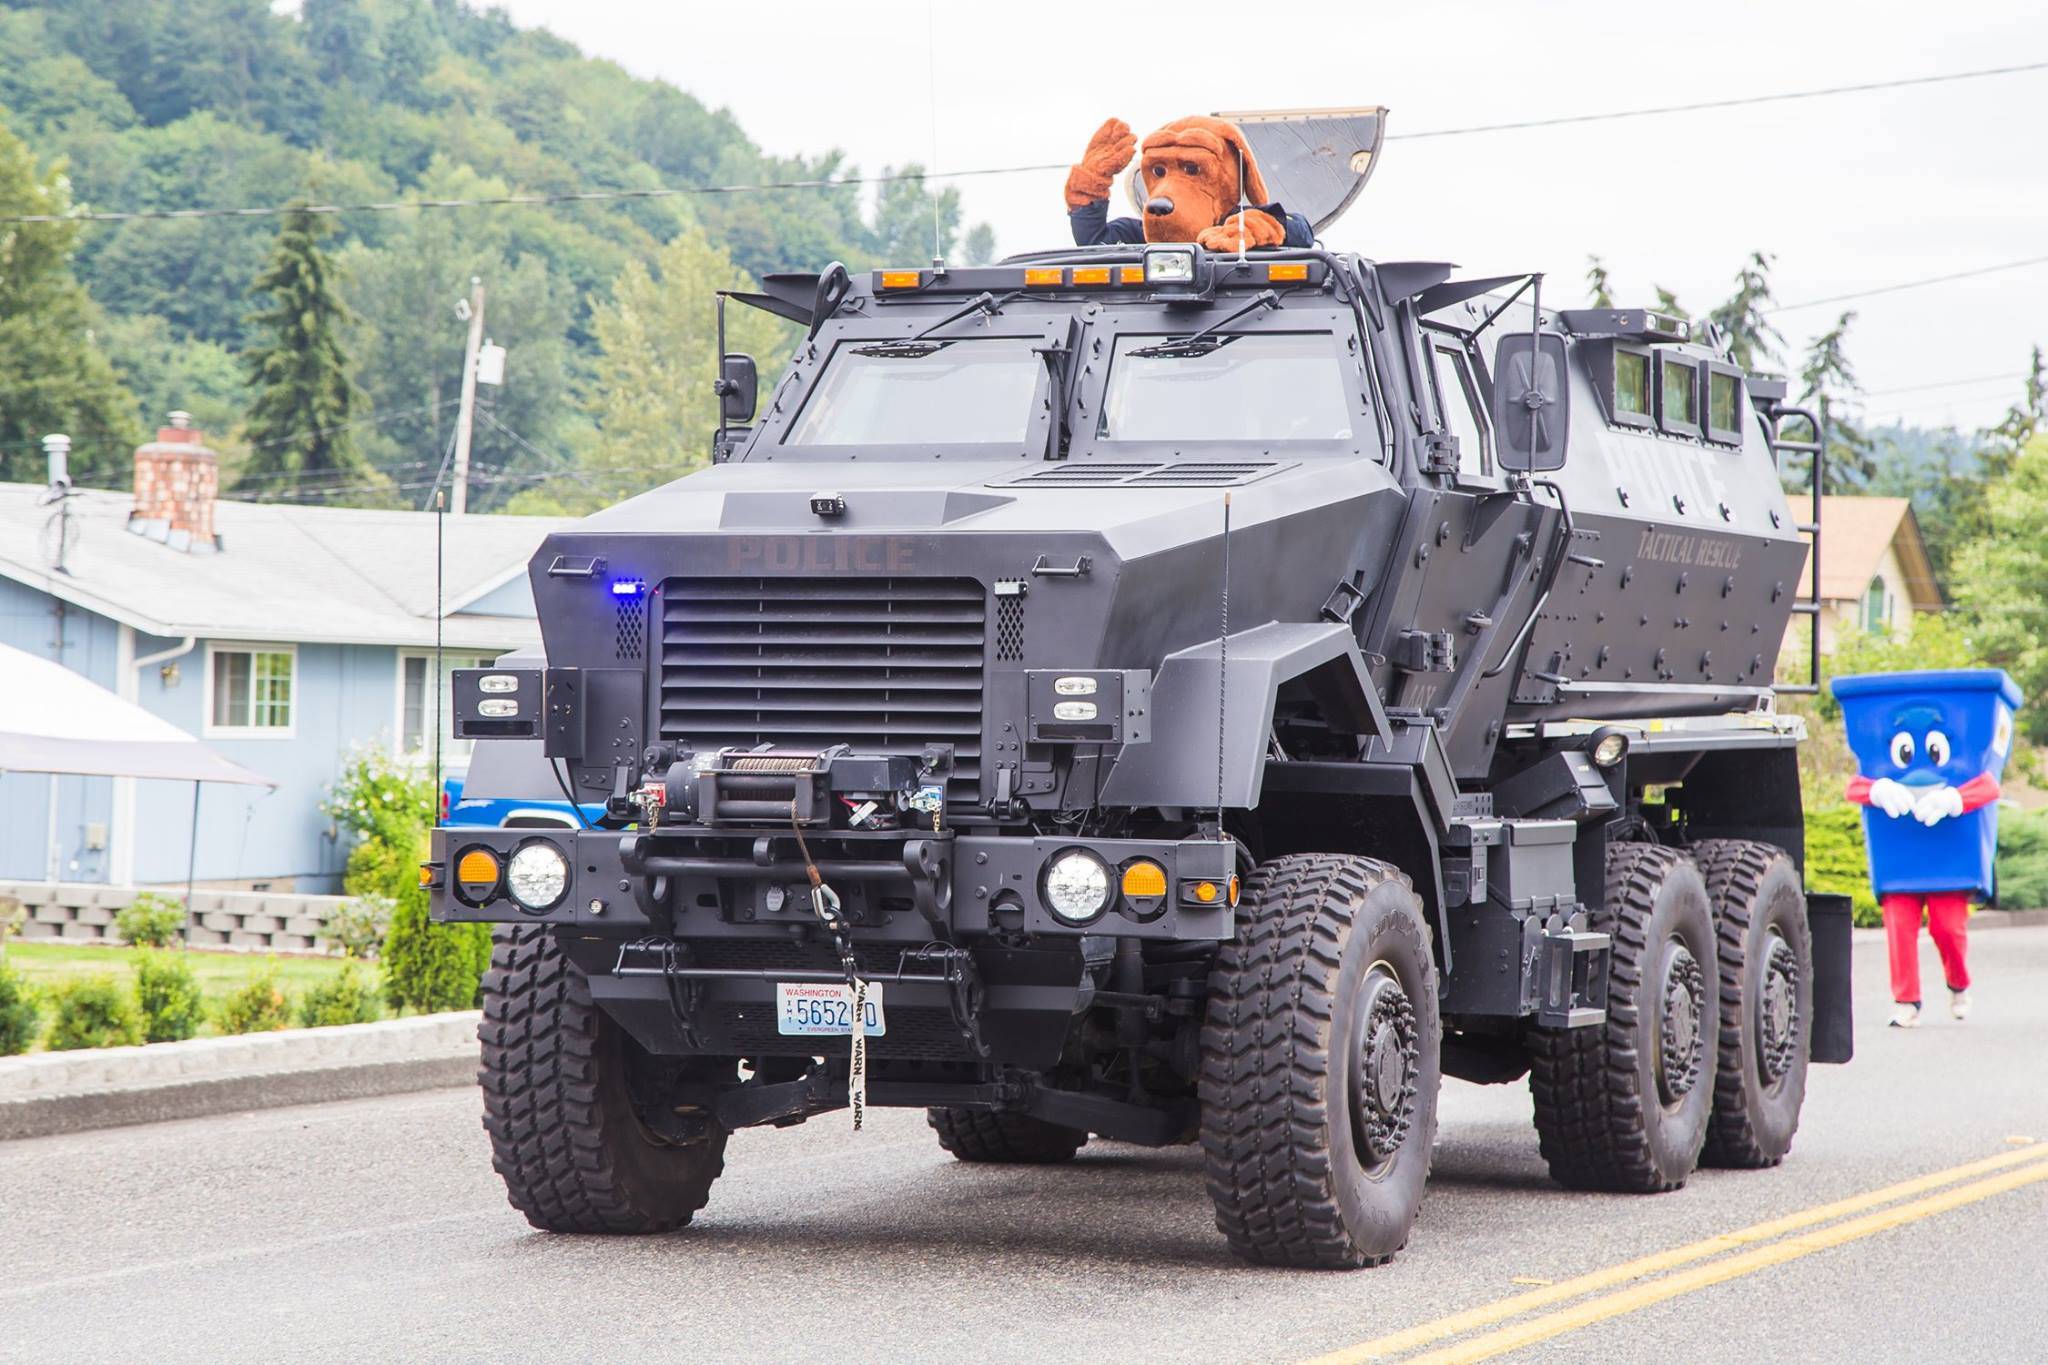 Snoqualmie Police Department houses a surplus military mine-resistant armored personnel carrier. They acquired it as part of an equipment sharing program from the federal government. It is utilized by a coalition of small-city police departments. It is seen here during a 2016 parade in Algona, one of the coalition member cities. From the Algona Police Department Facebook page